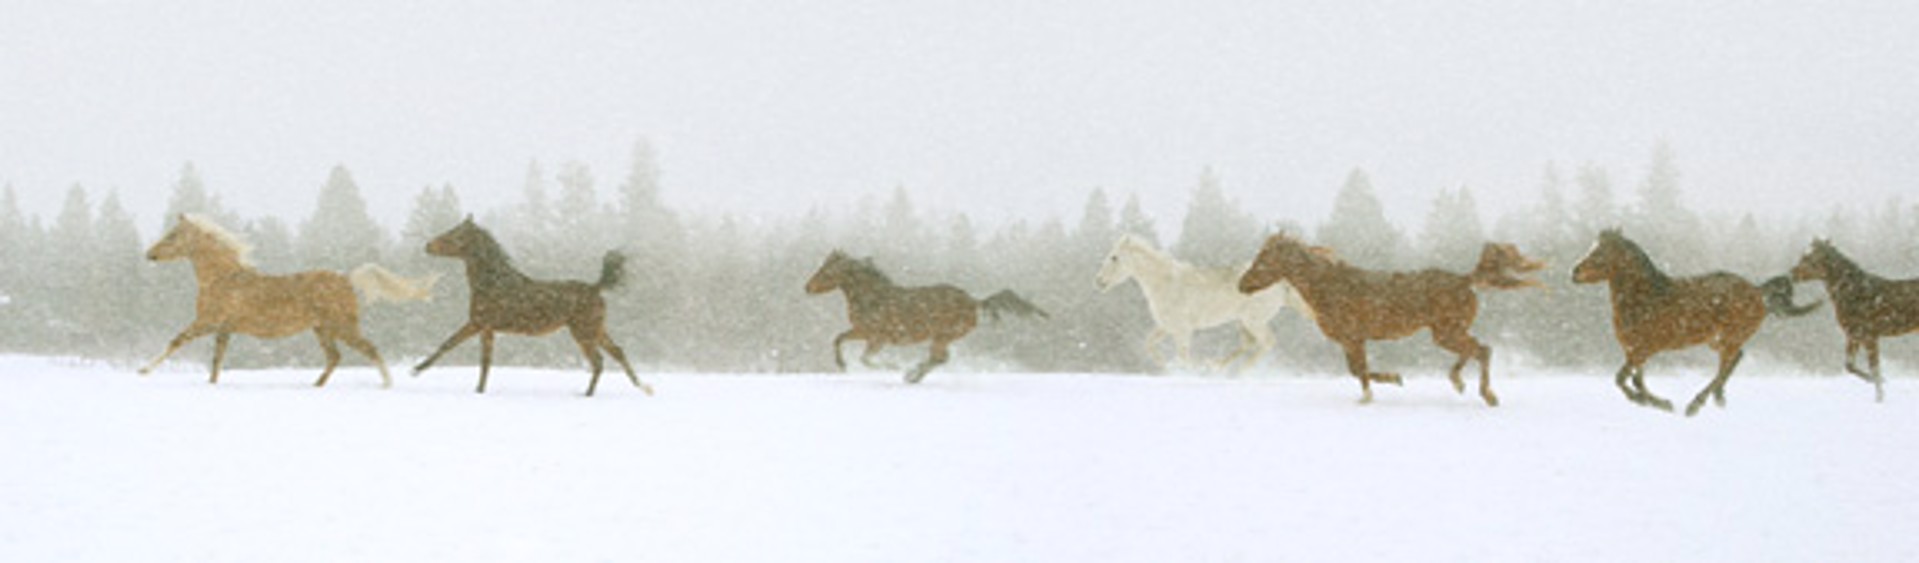 Horses in Snow by Pete Ramberg